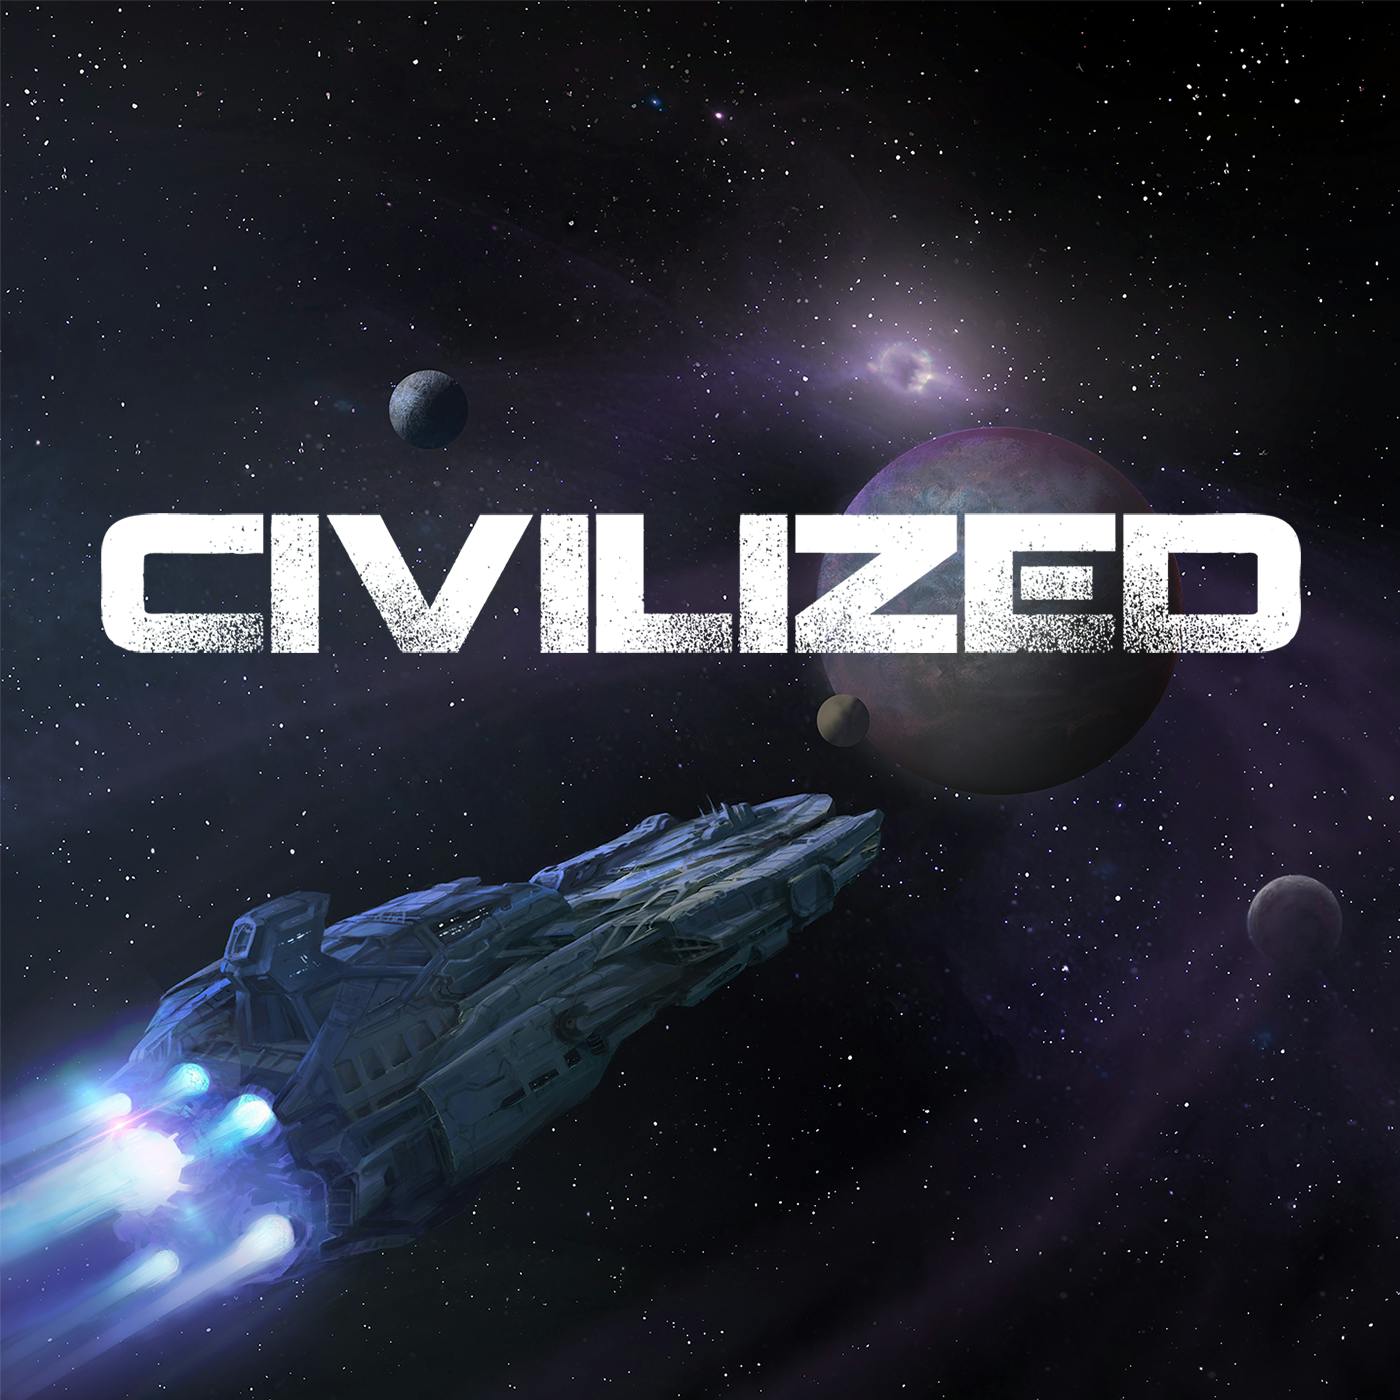 PRESENTING: Civilized (Definitely NOT a Cam Candor Production)